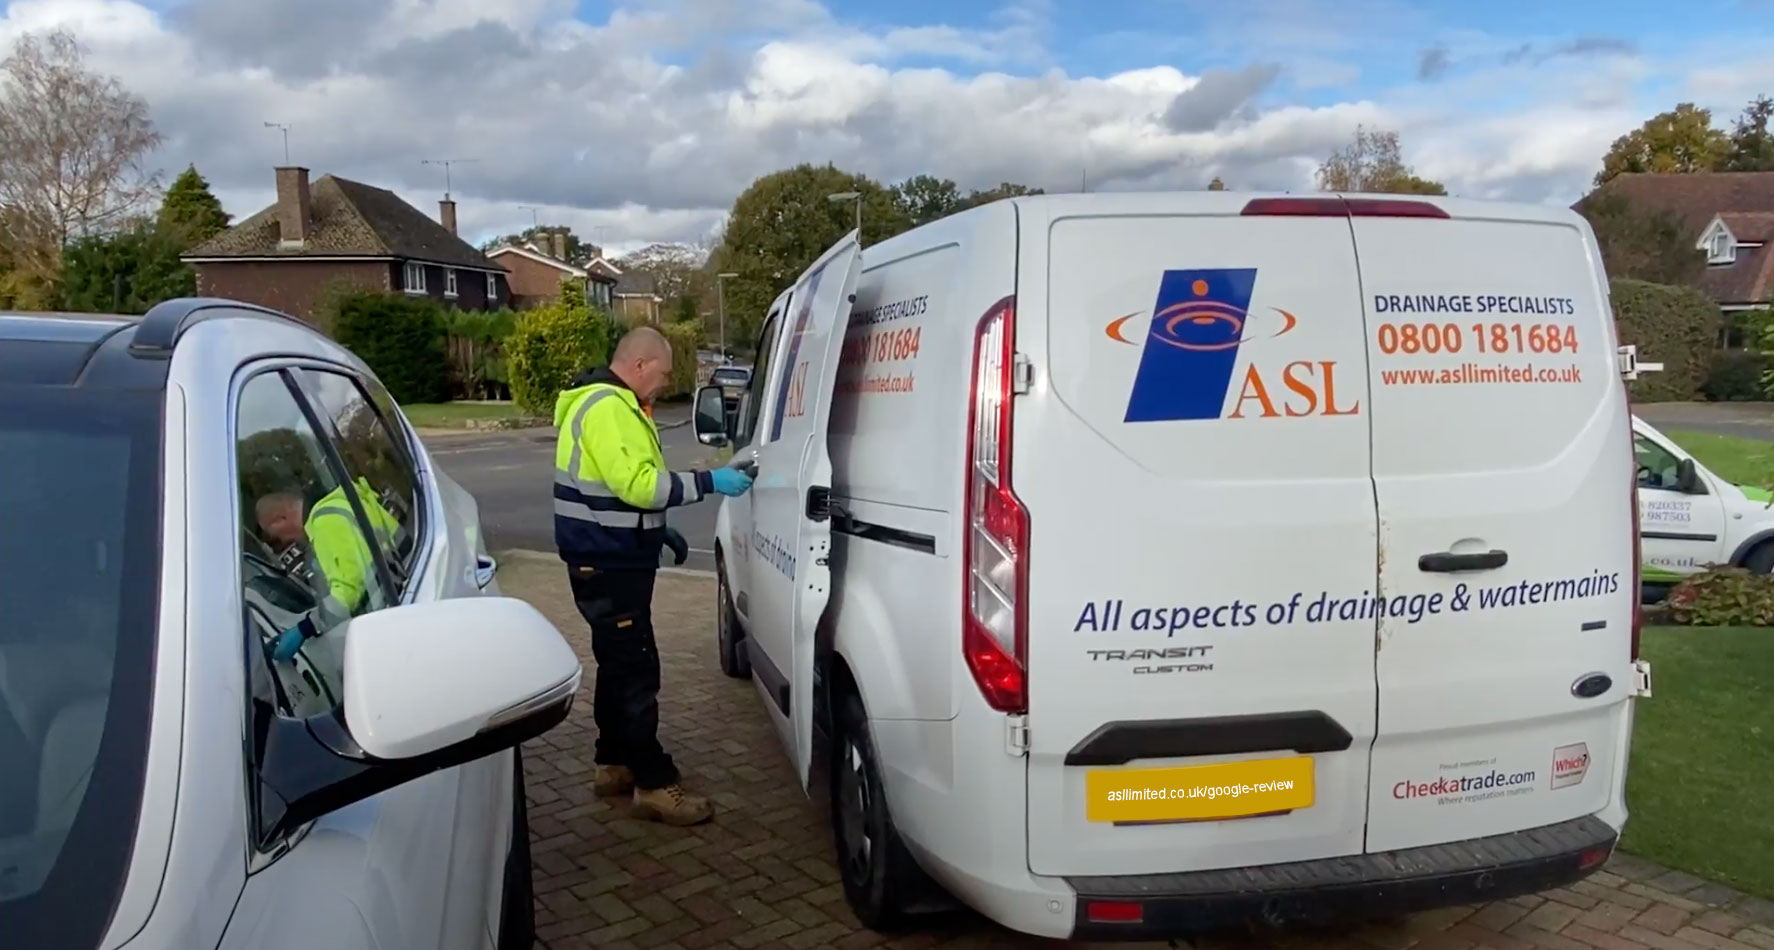 A photo of our Darren with his blocked drains van in Guildford, Surey.